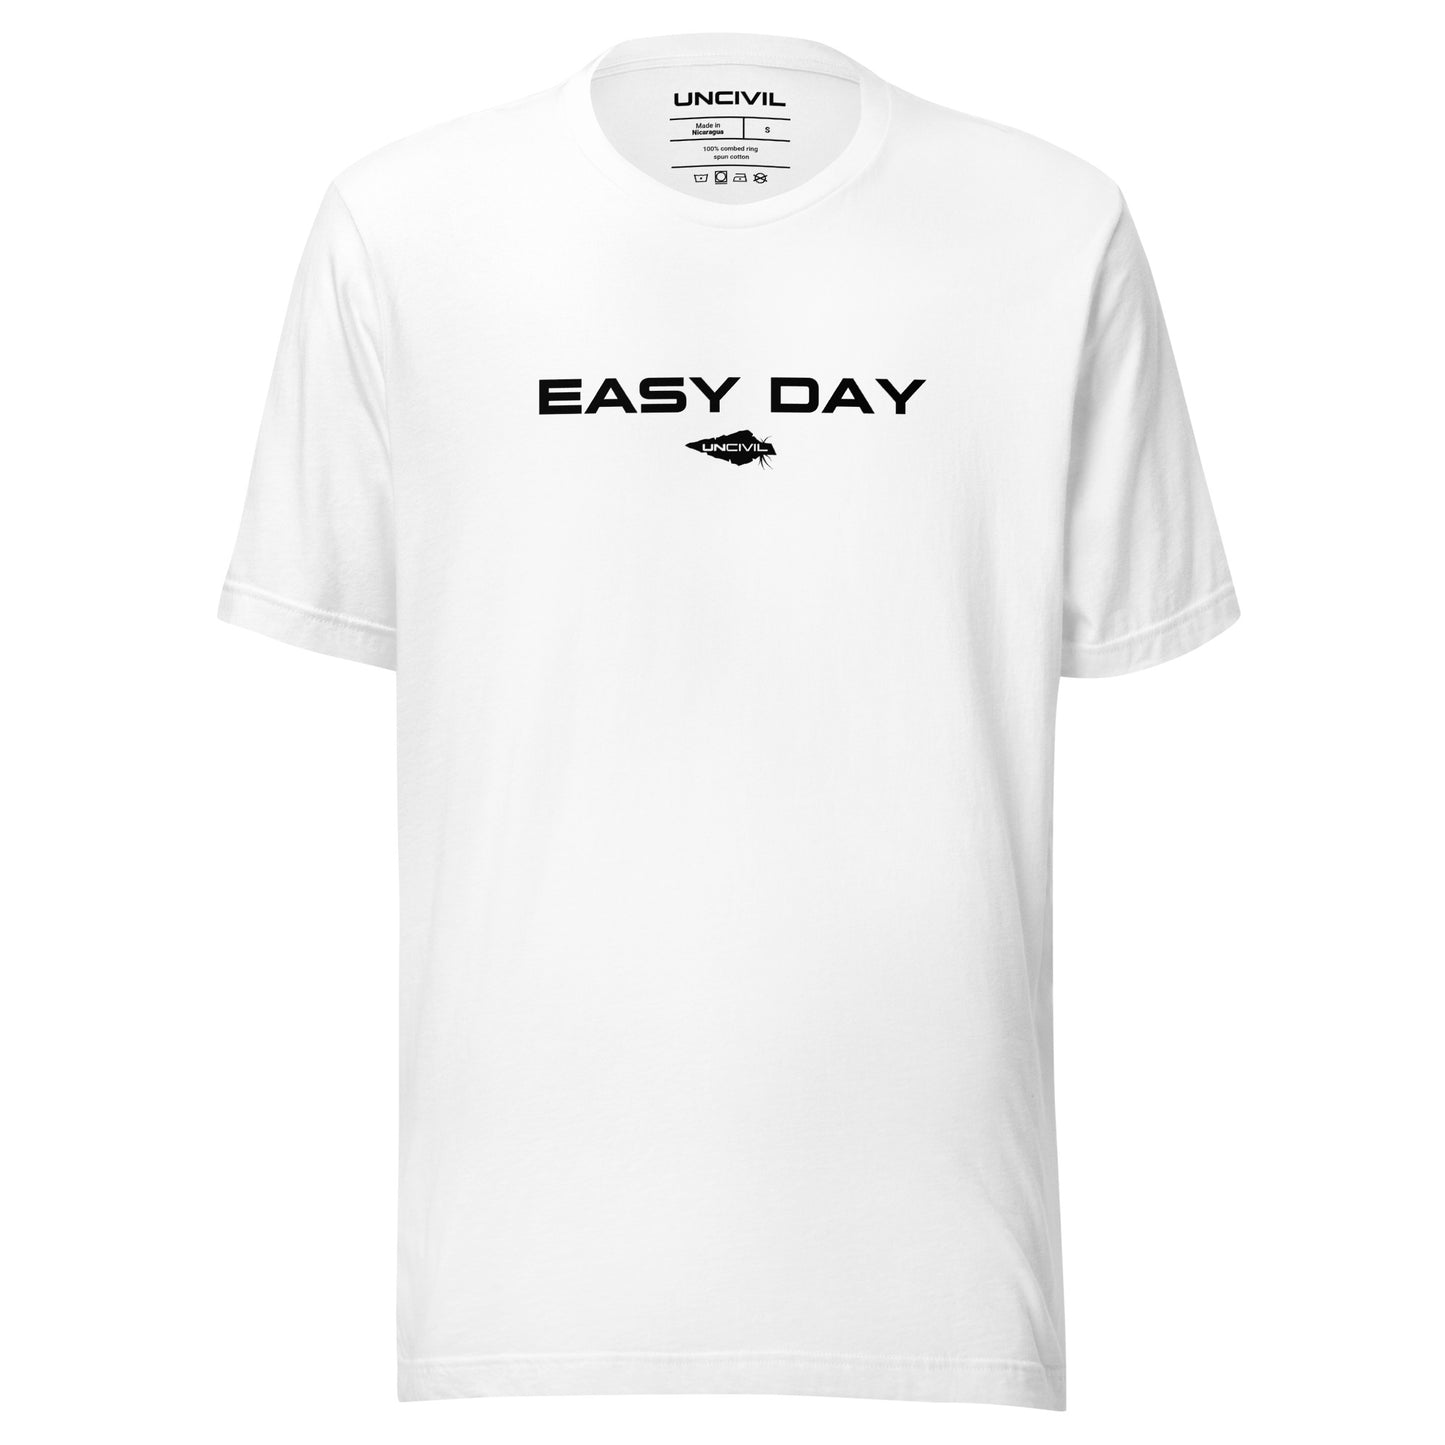 Easy Day UNCIVIL Tee, inspired by the Navy Seals phrase "Easy Day". White men's shirt.